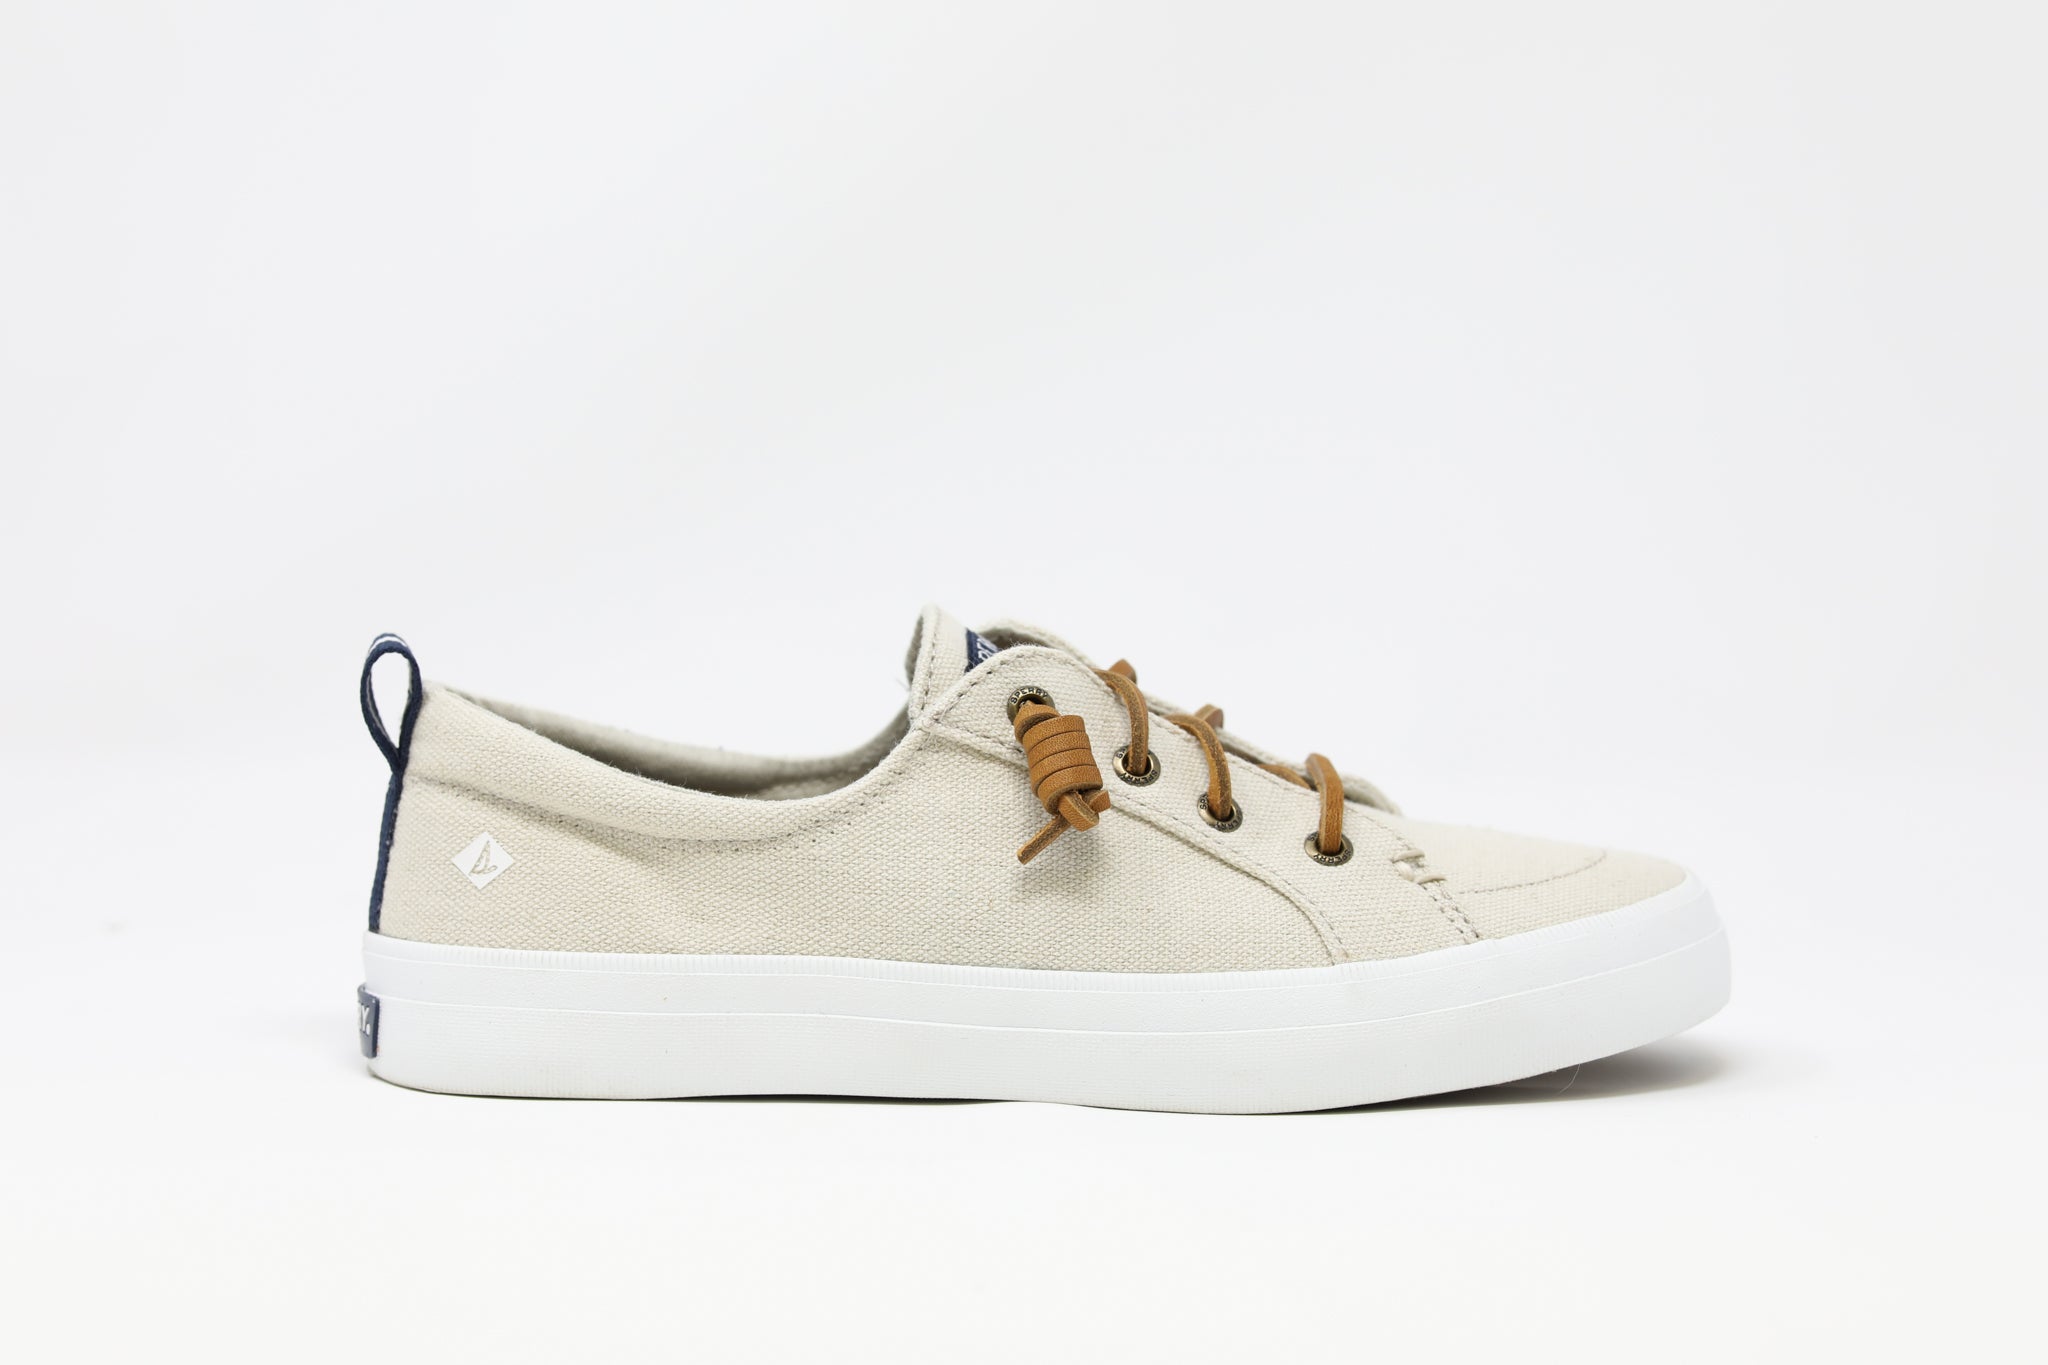 SPERRY CREST VIBE